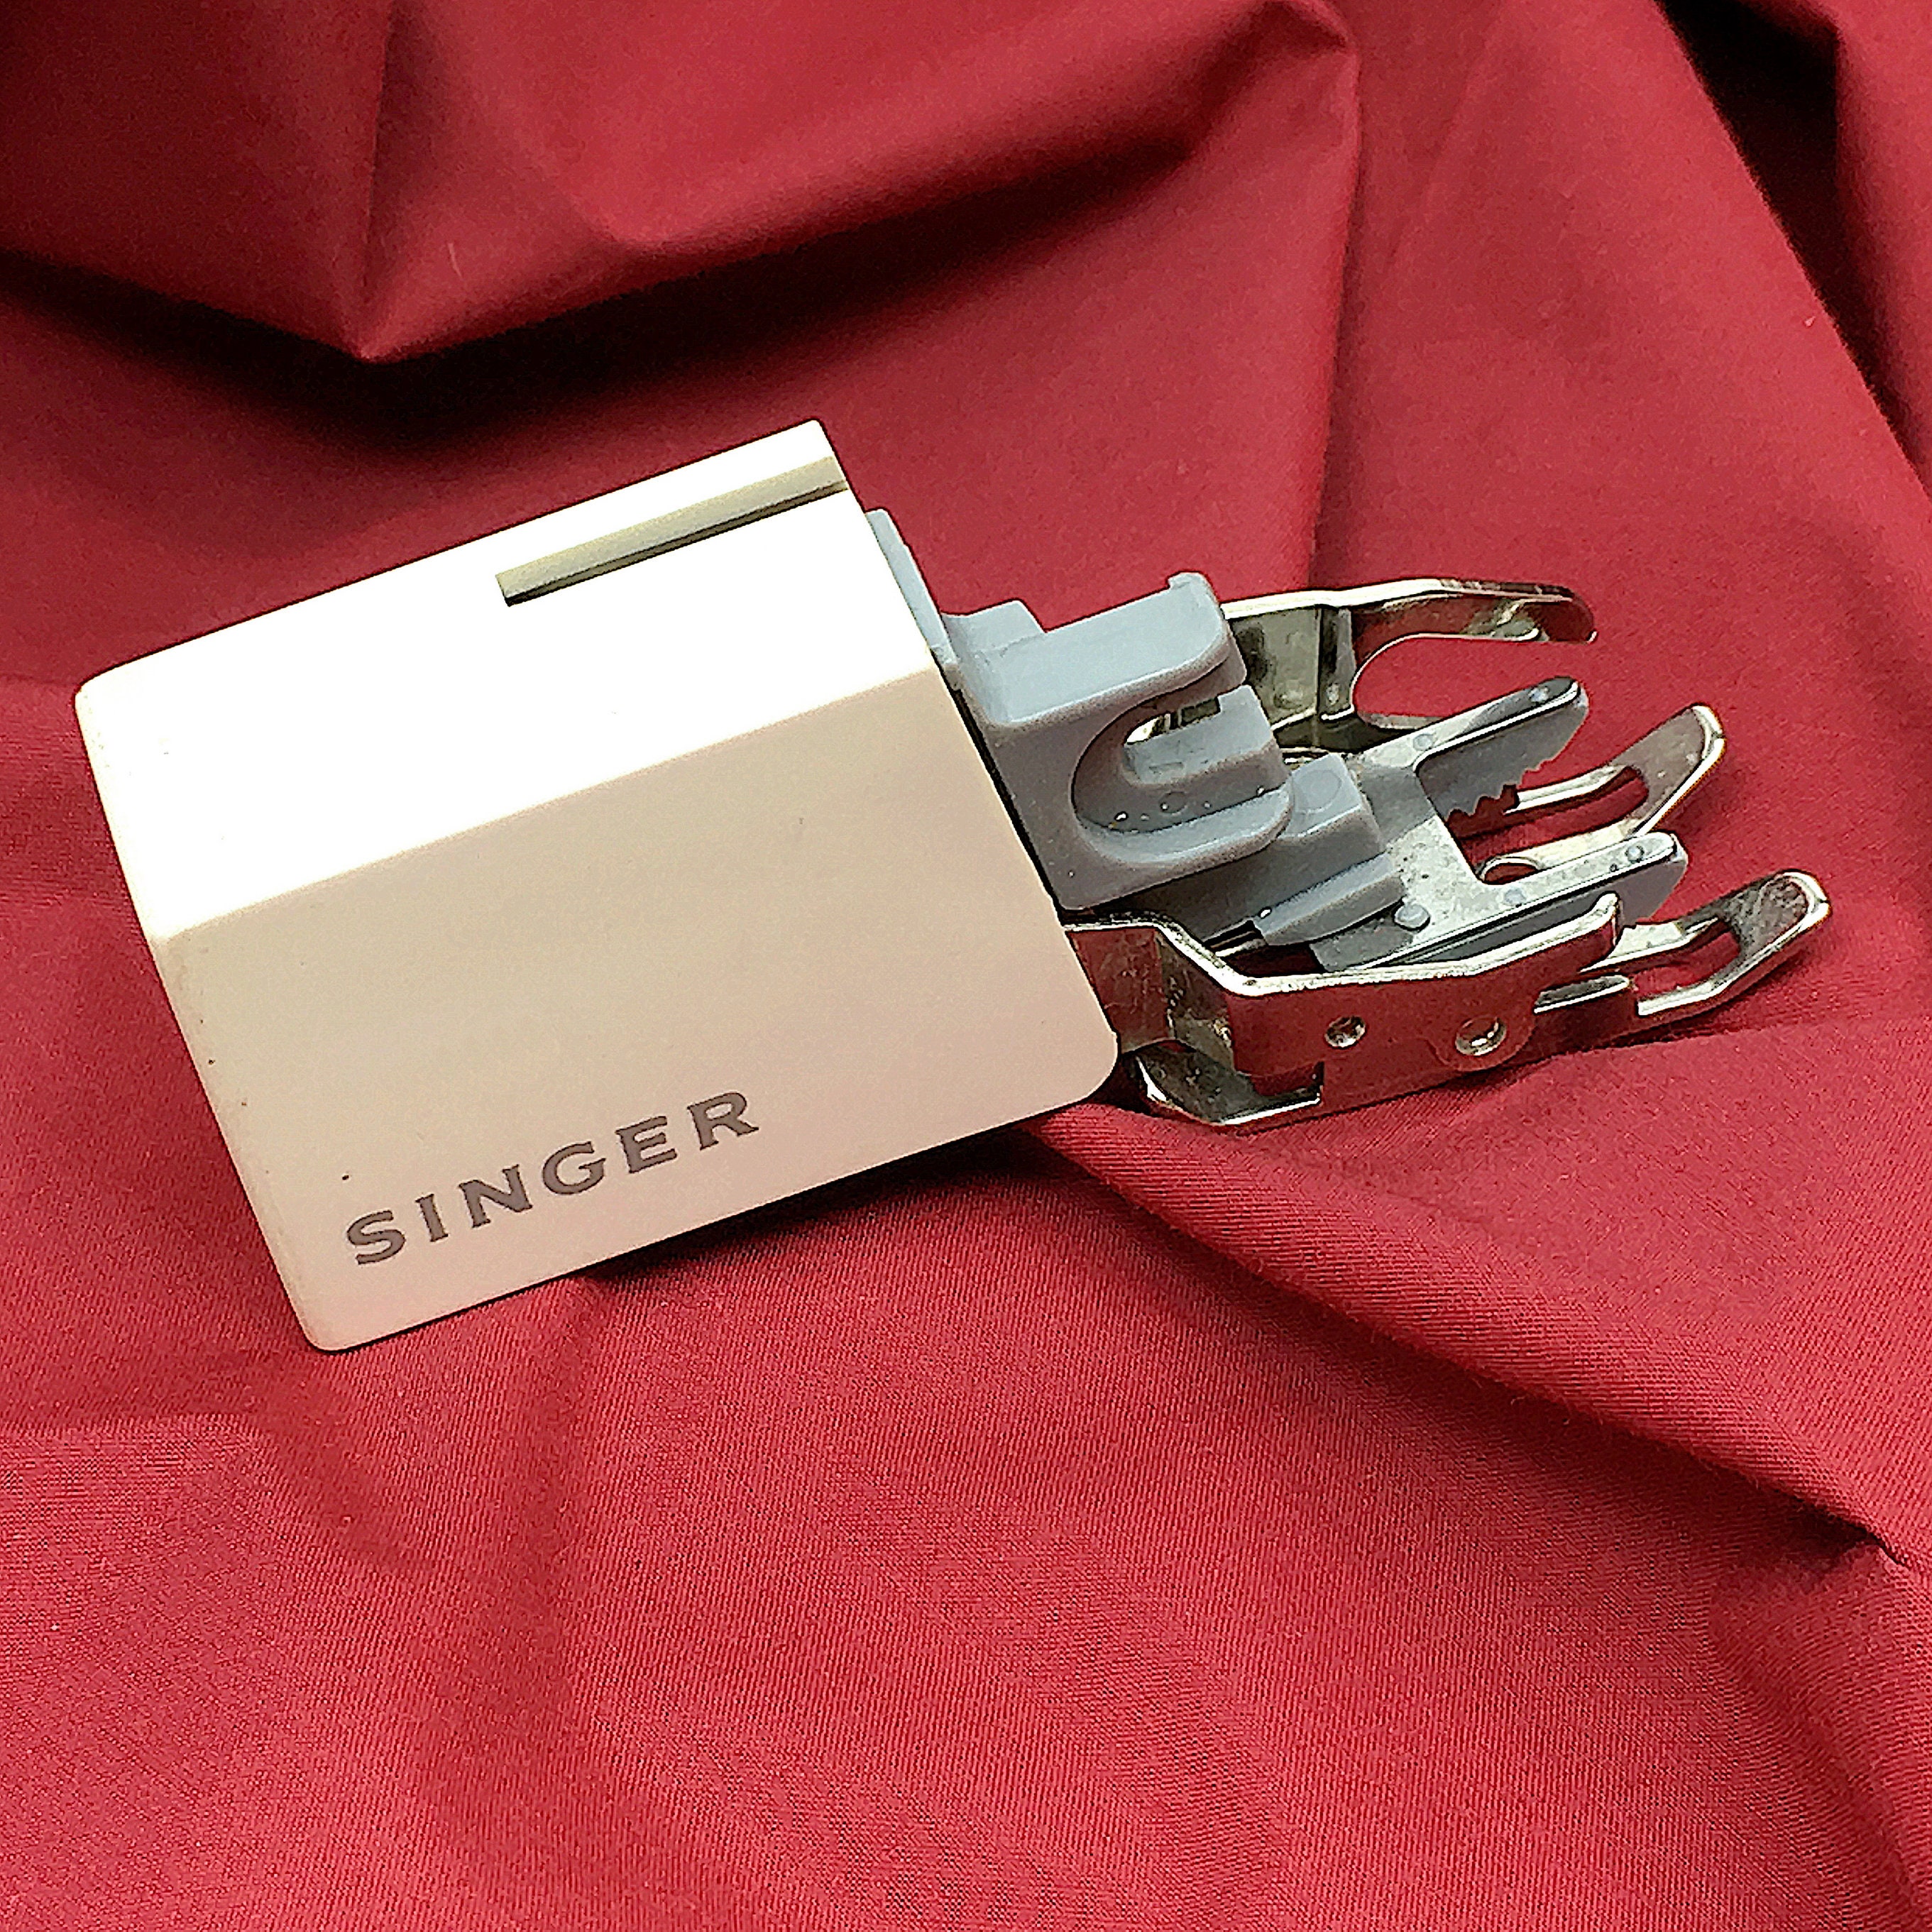 Singer 331lx918  Real walking foot .. pics - Leather Sewing